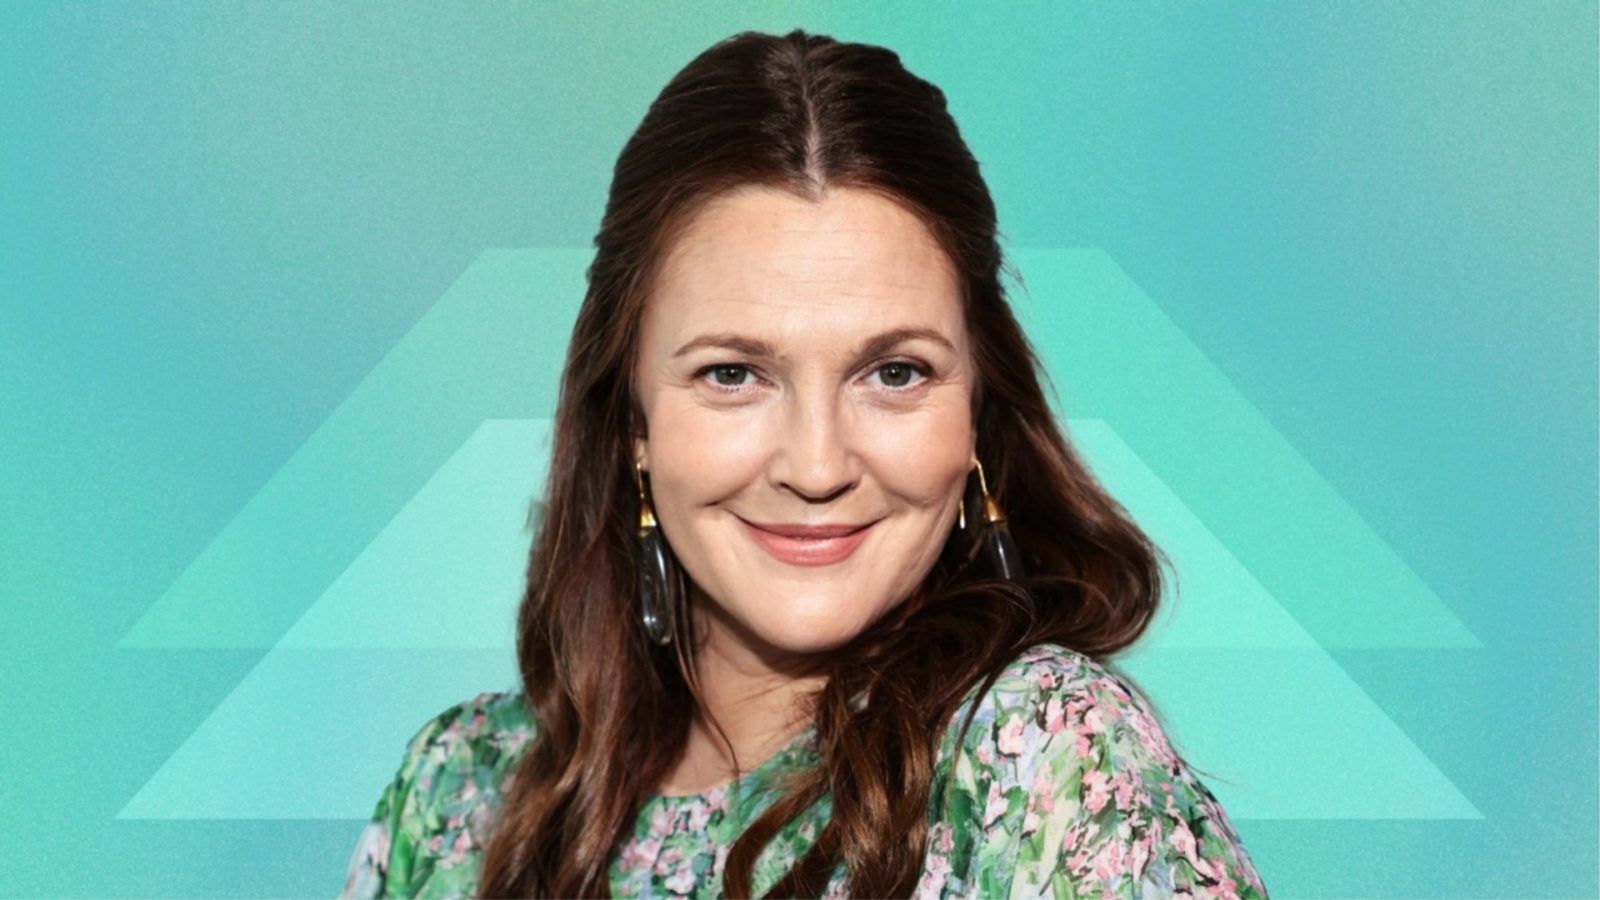 How Drew Barrymore is focusing on her mental and physical wellness